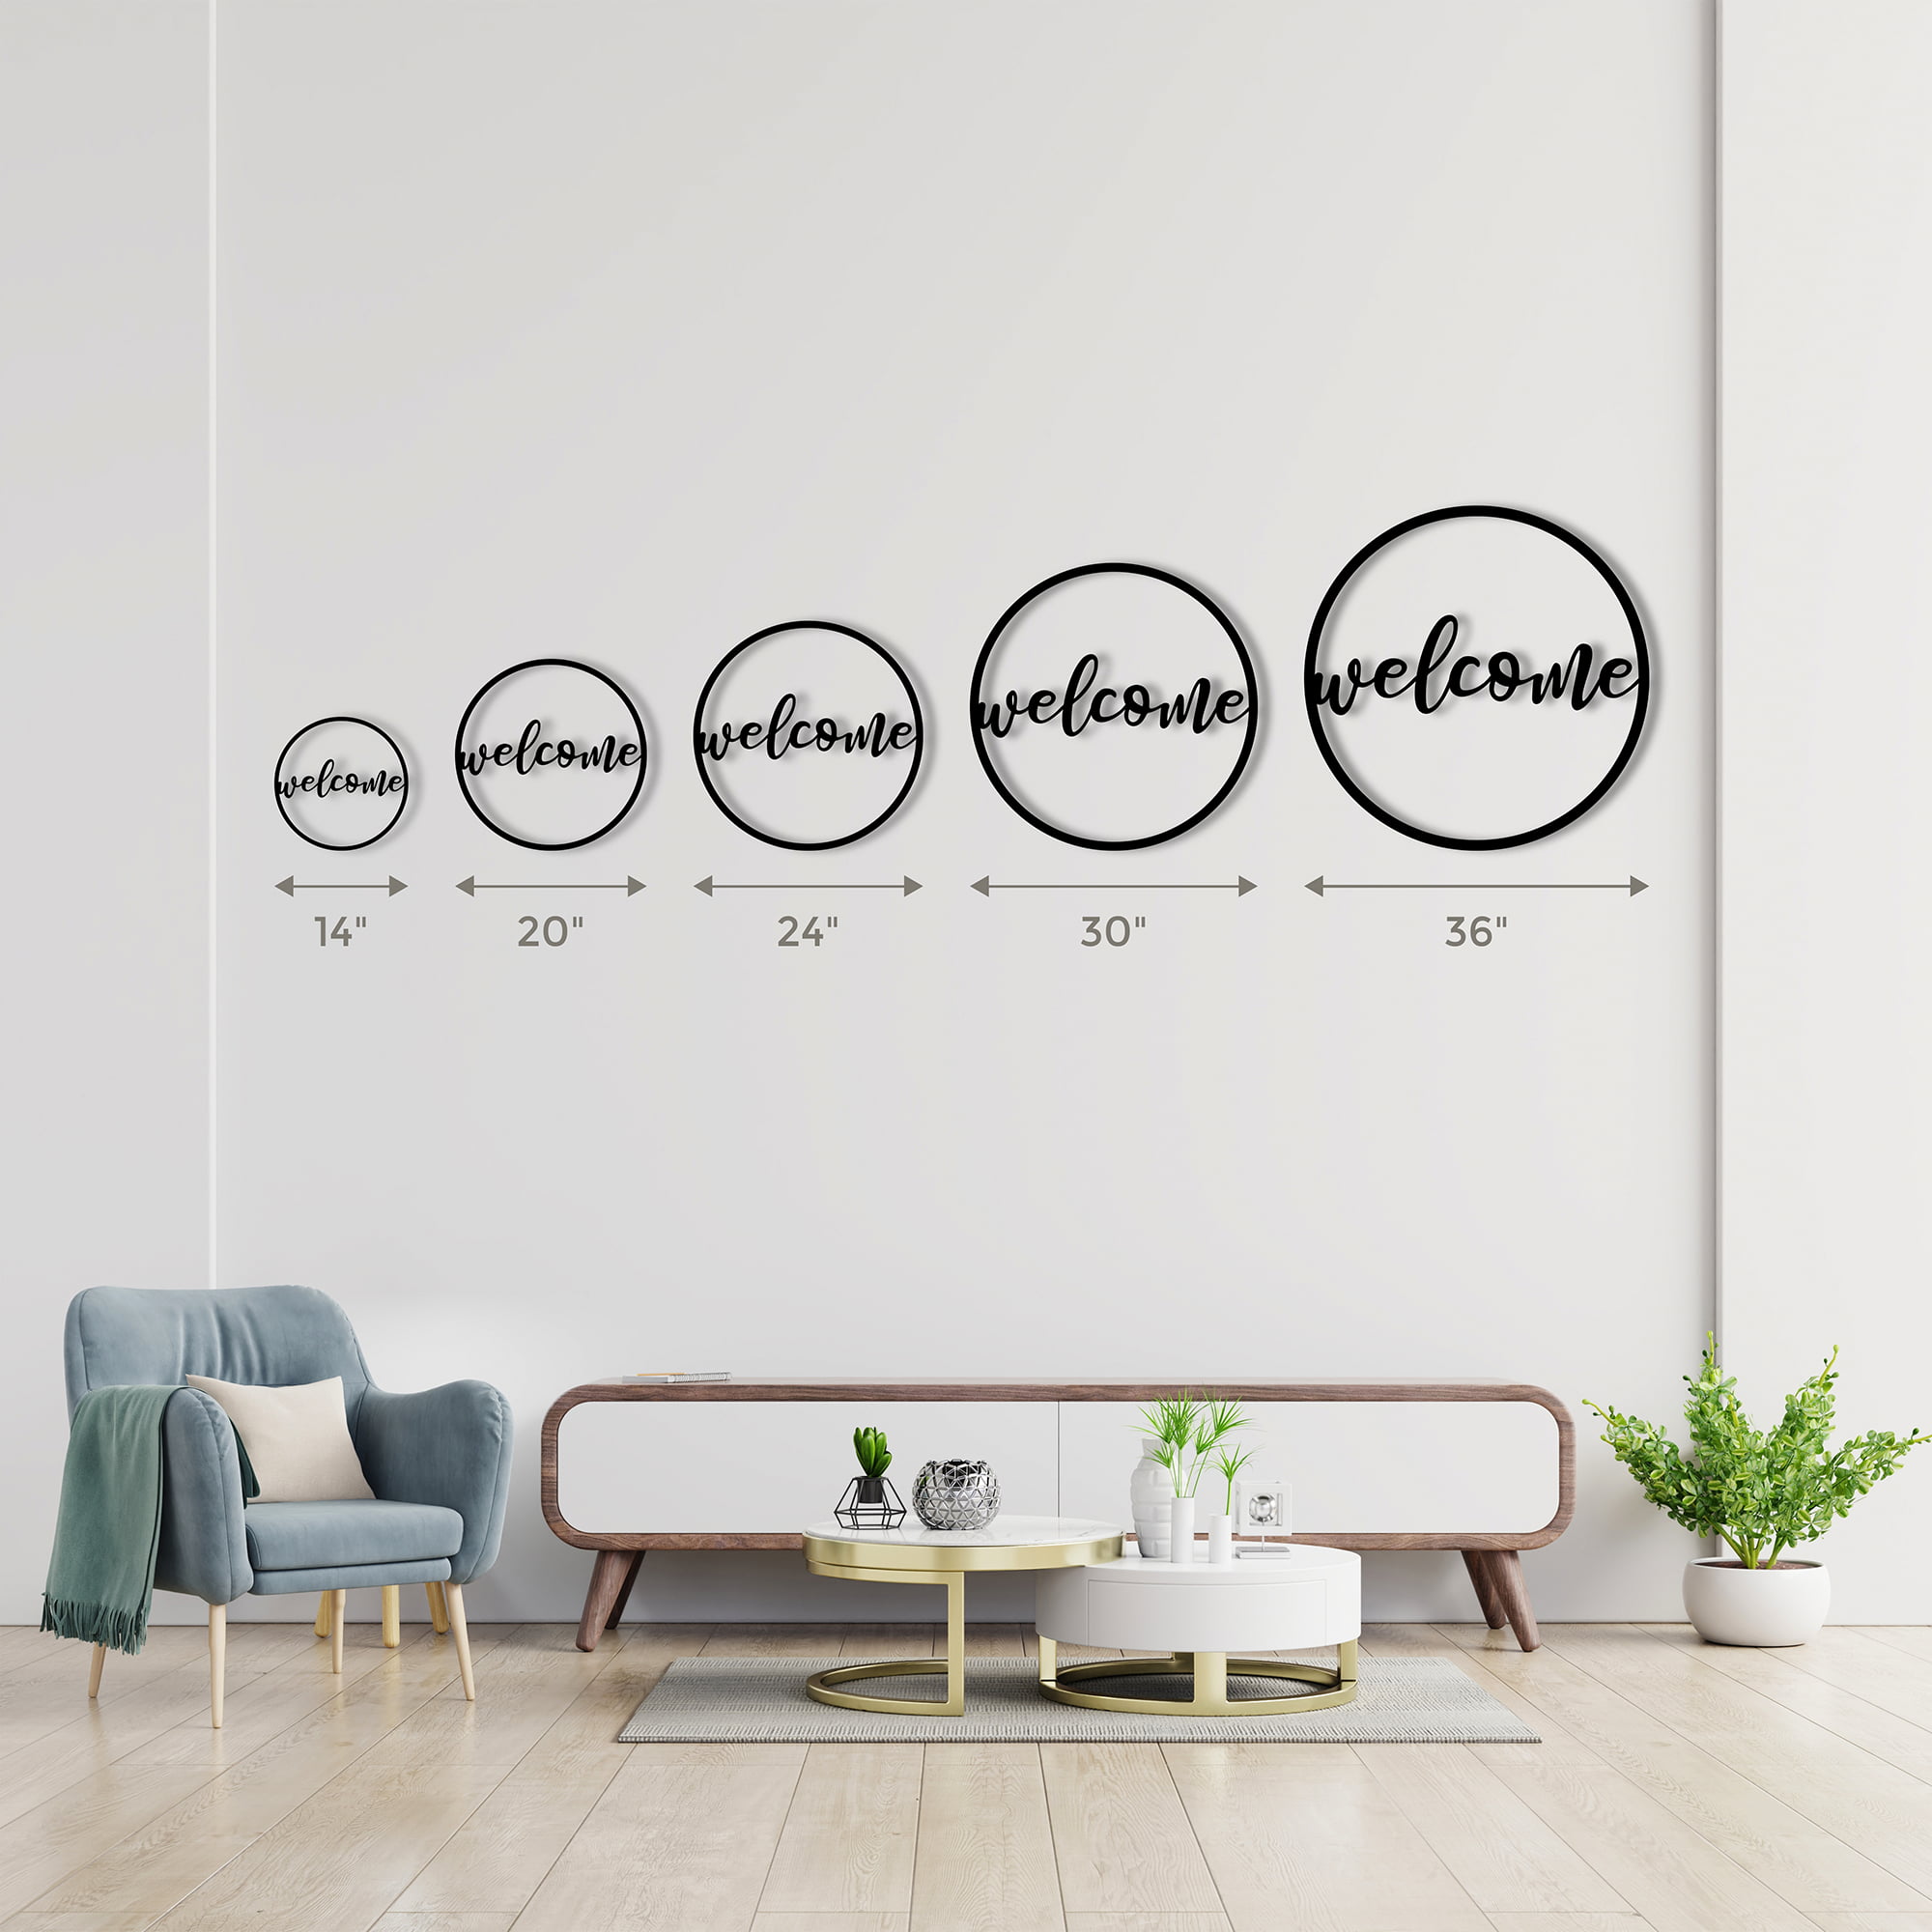 Some of Our Favorite Interior Signage Ideas | The H&H Group